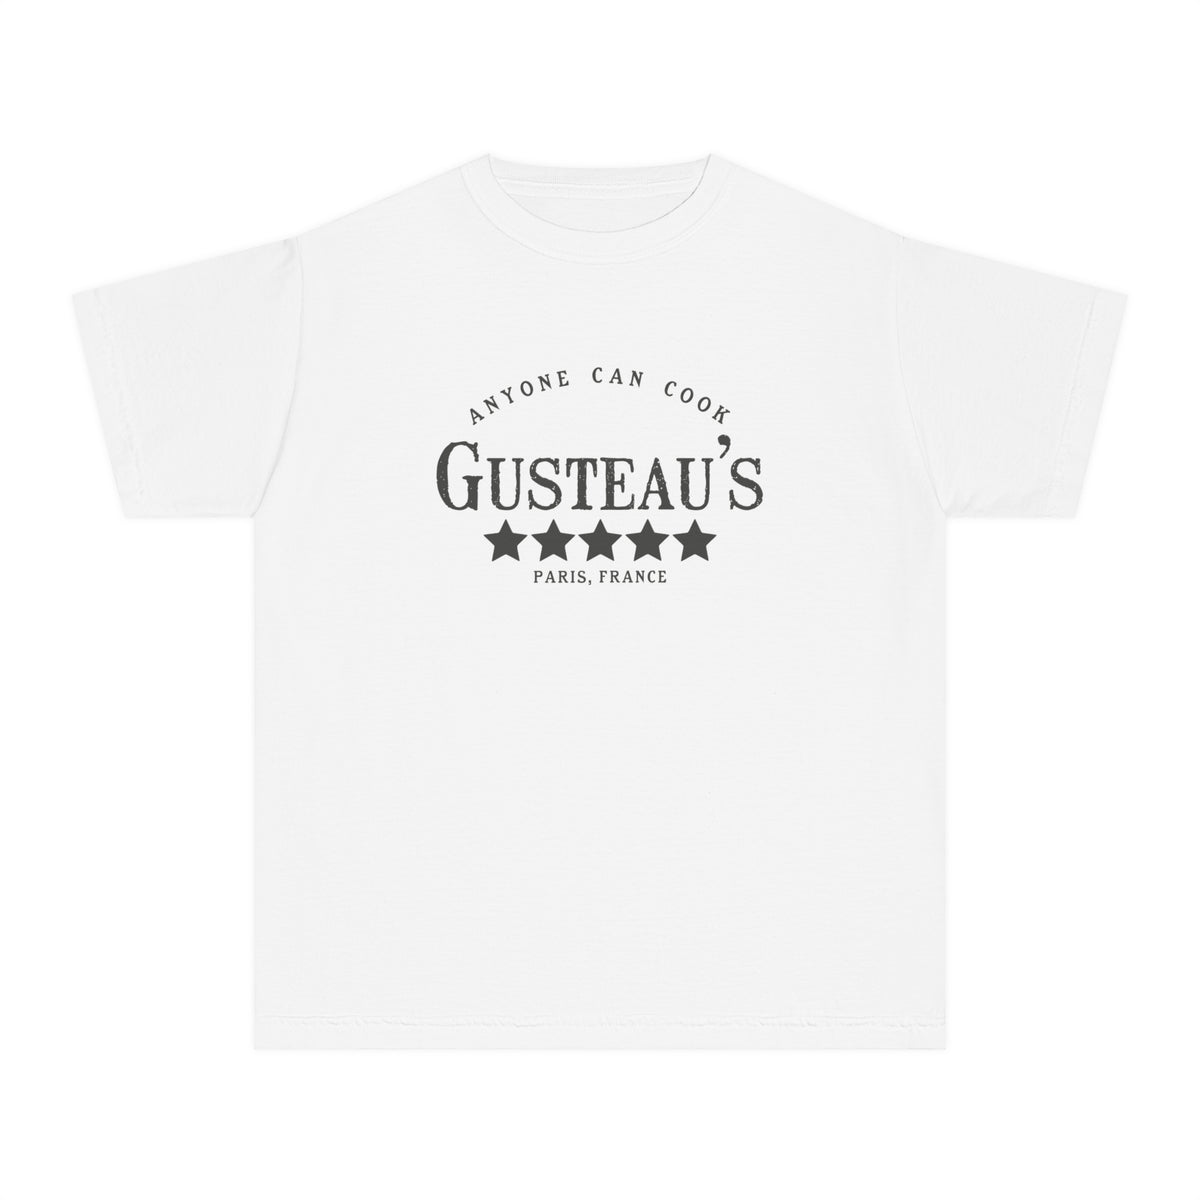 Gusteau’s Anyone Can Cook Comfort Colors Youth Midweight Tee